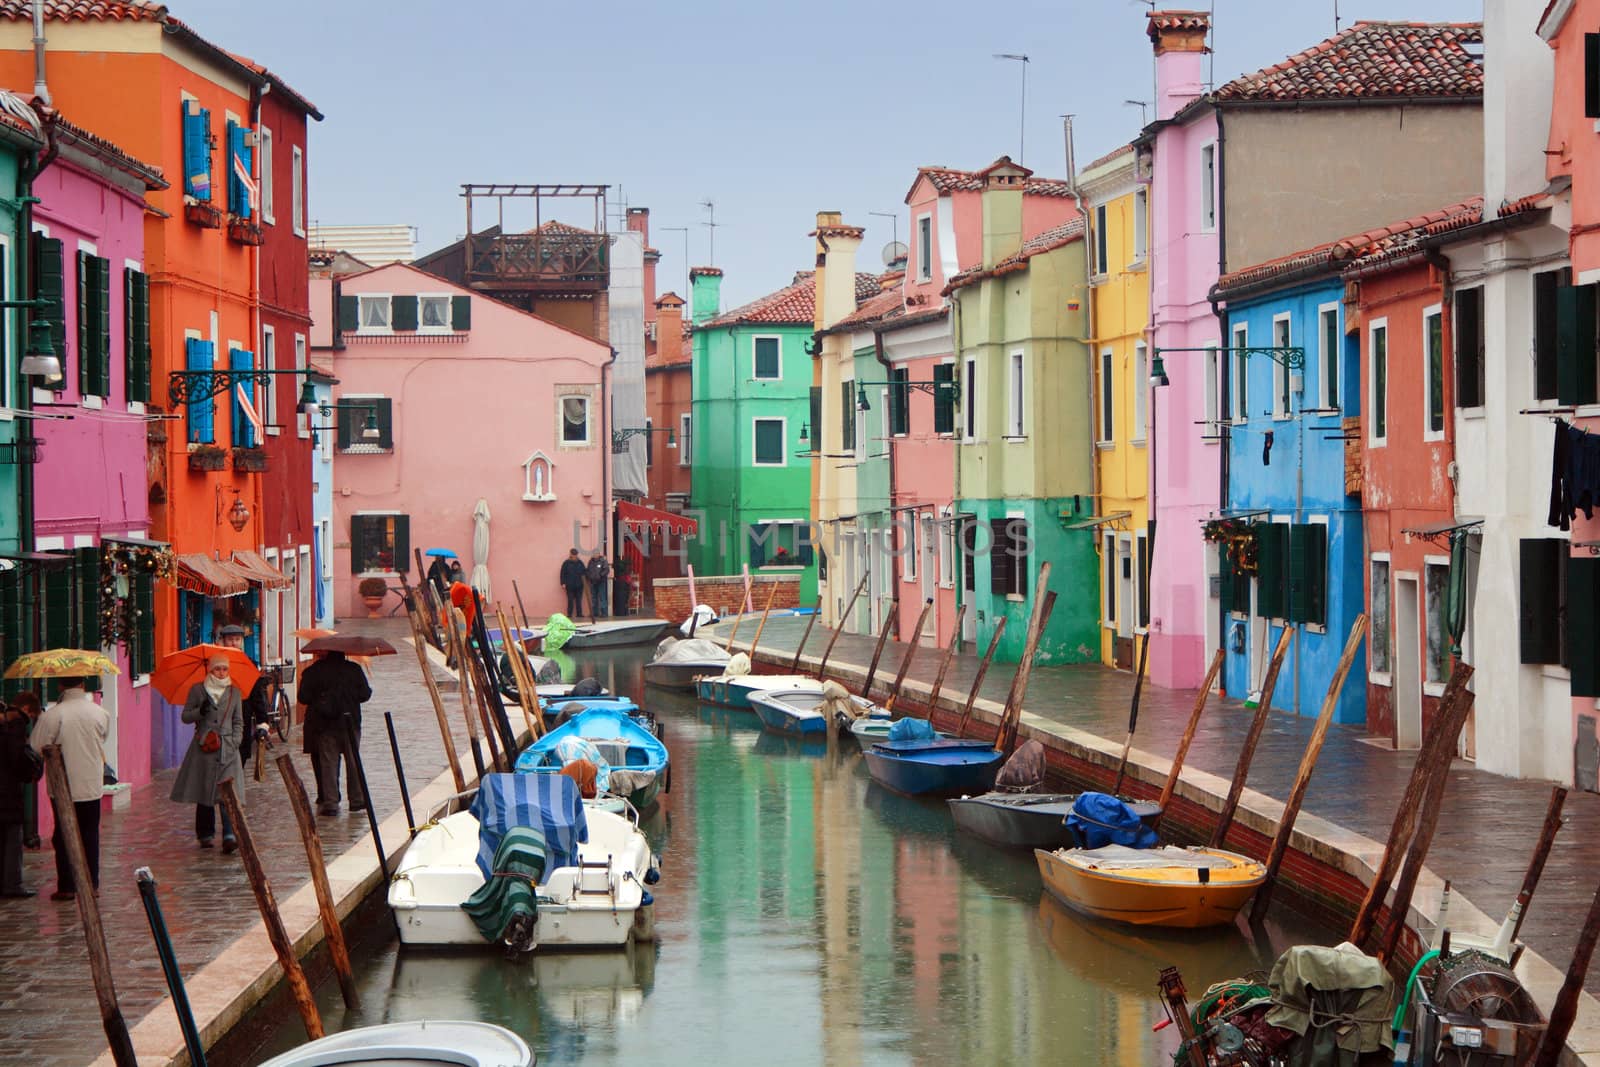 The bright pastel-coloured houses on Burano Island in the north of Venice's lagoon, Italy